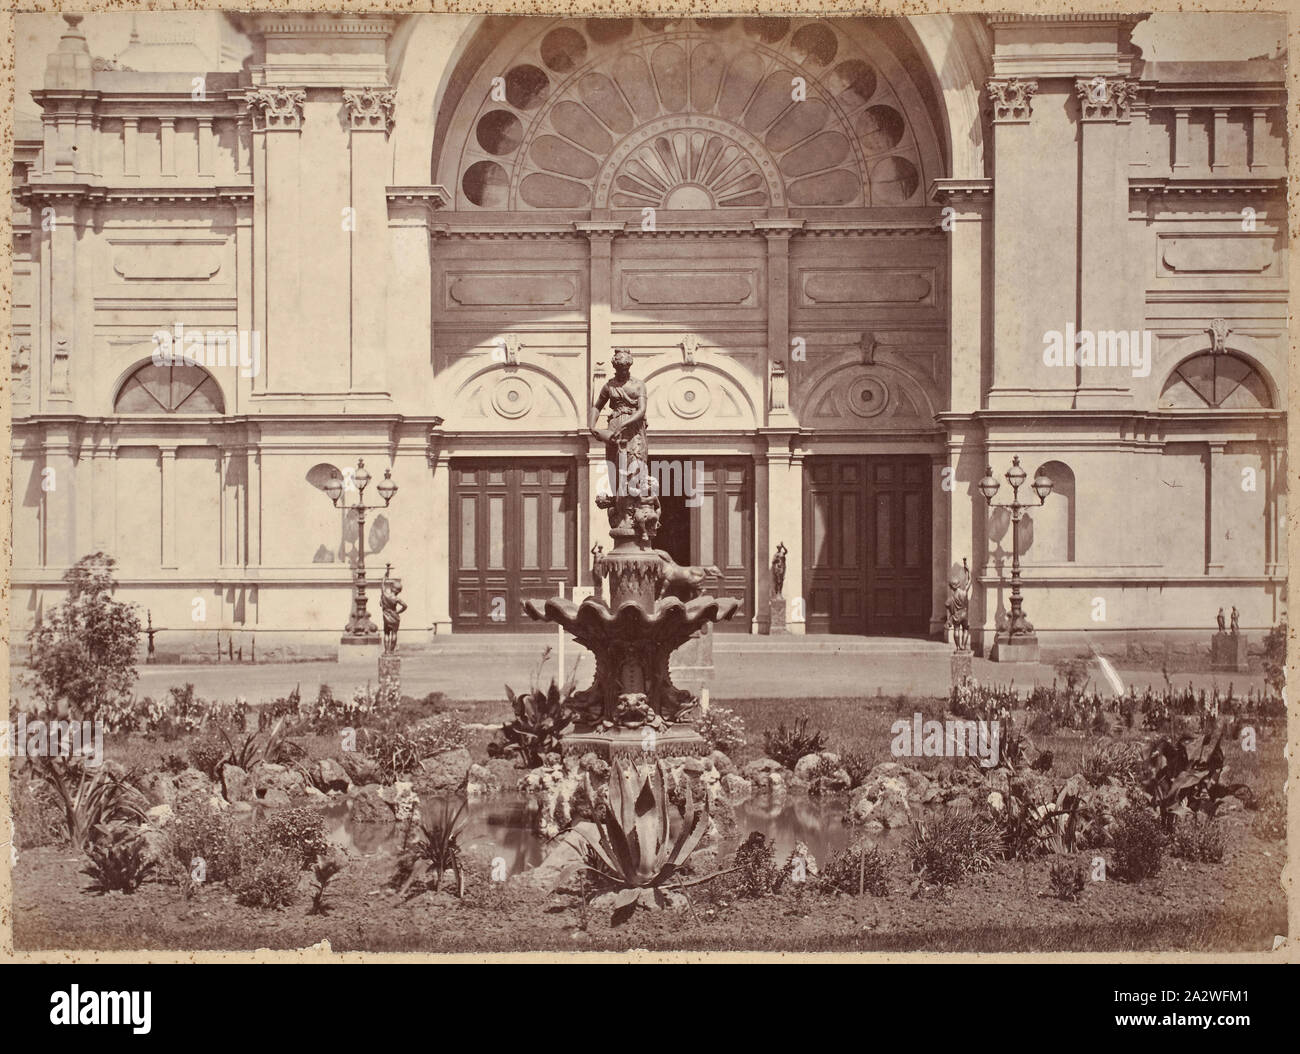 Photograph - French Fountain, Eastern Forecourt, Exhibition Building, 1880-1881, View of the original French Fountain in the eastern forecourt of the Exhibition Buildings, Carlton Gardens, between 1 October 1880 and 30 April 1881. Although it is unclear when the fountain was removed, photographs showing the eastern forecourt in the early twentieth century already reveal that the fountain had been replaced by the current design, manufactured by Antoine Durenne. This is one of Stock Photo